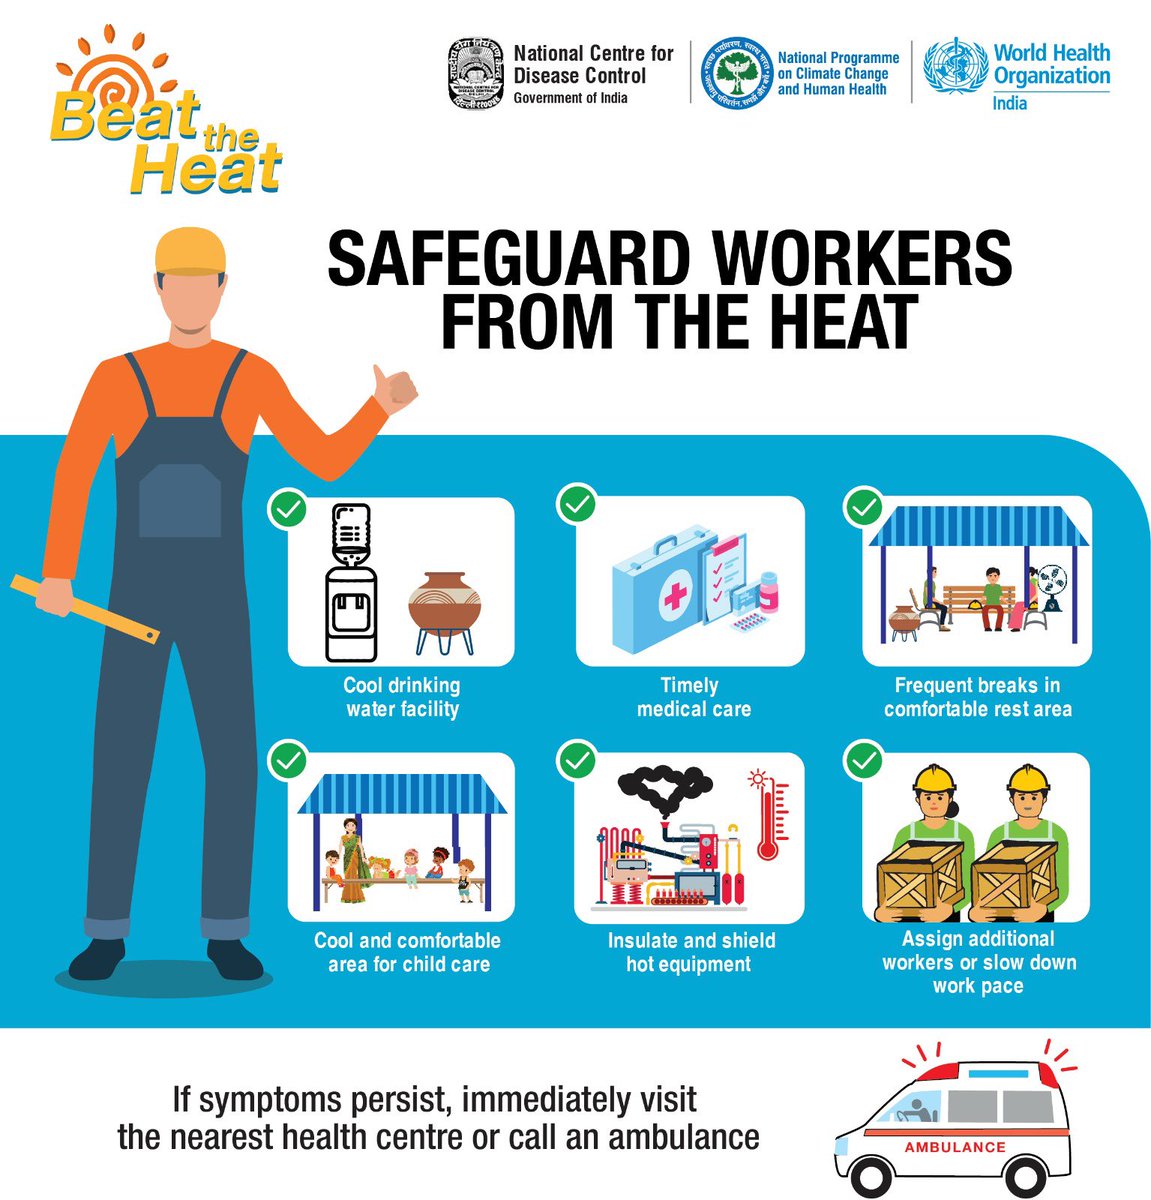 Safeguard outdoor works from extreme heat!

Provide clean, cold drinking water, shade, frequent breaks and first aid when needed to avoid heat exhaustion!
.
#BeatTheHeat